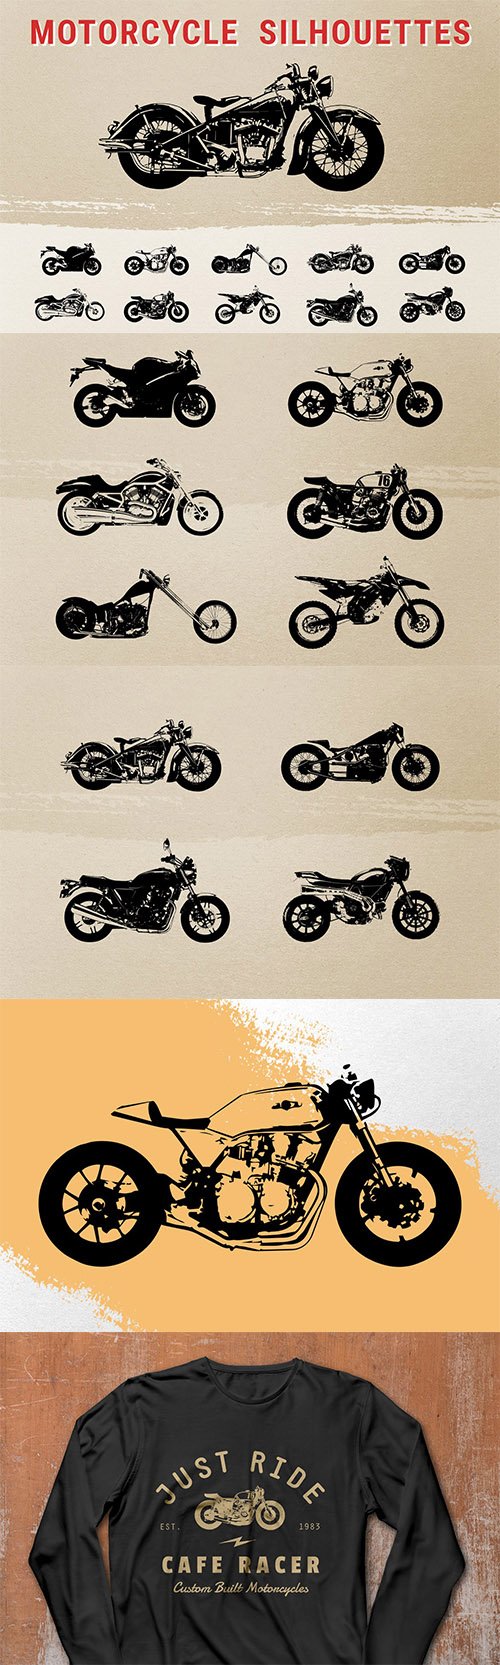 Vintage Motorcycle Silhouettes